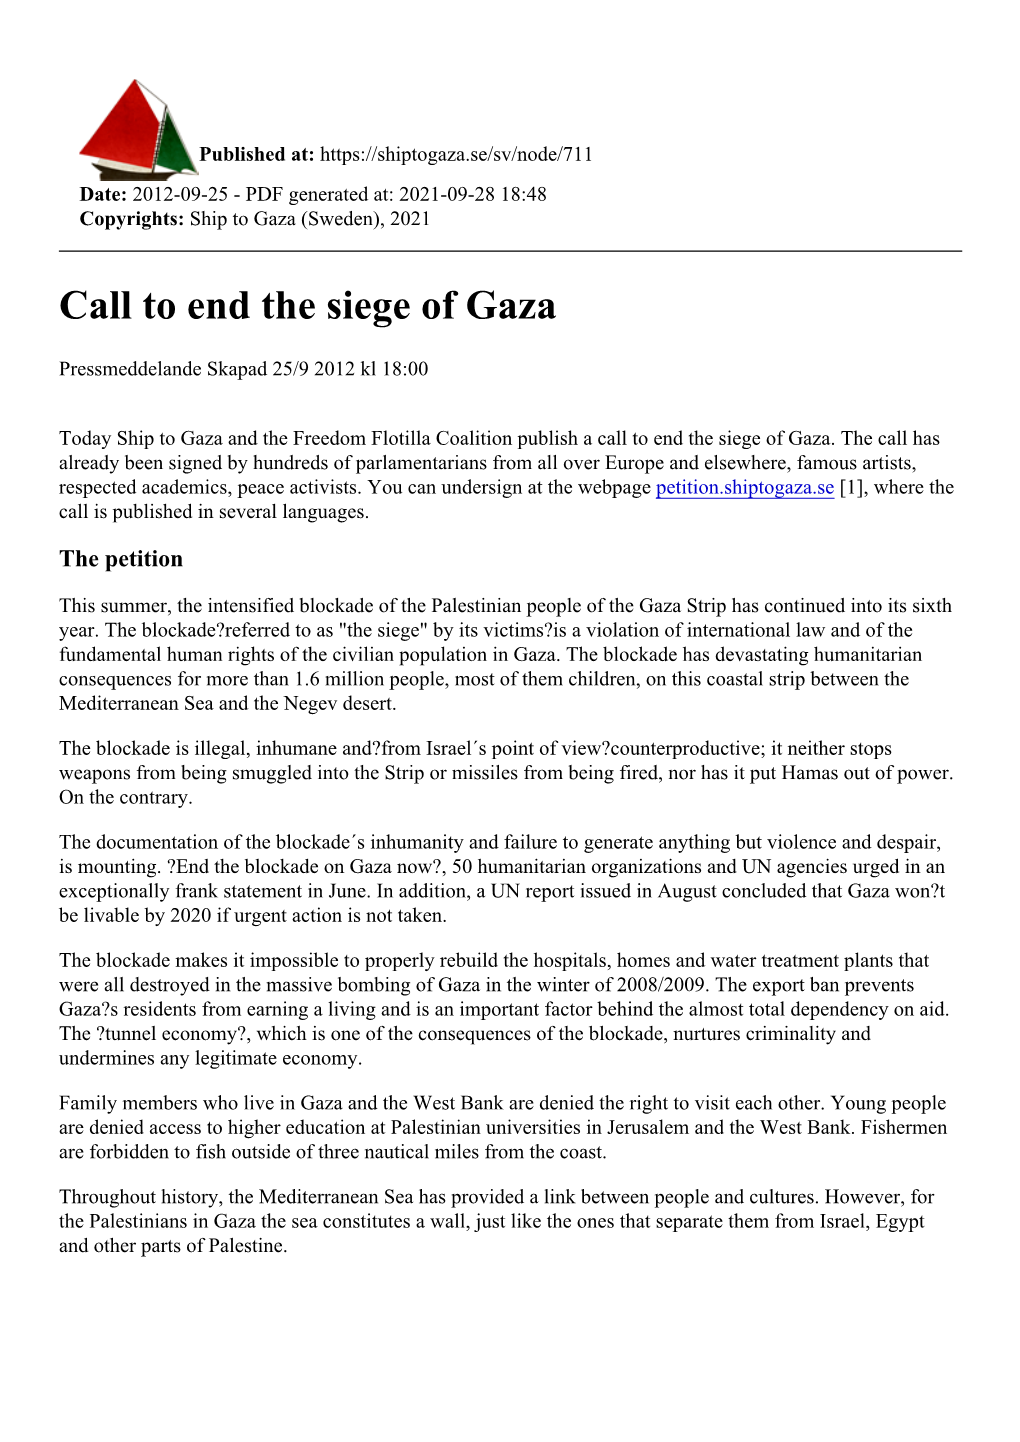 Call to End the Siege of Gaza